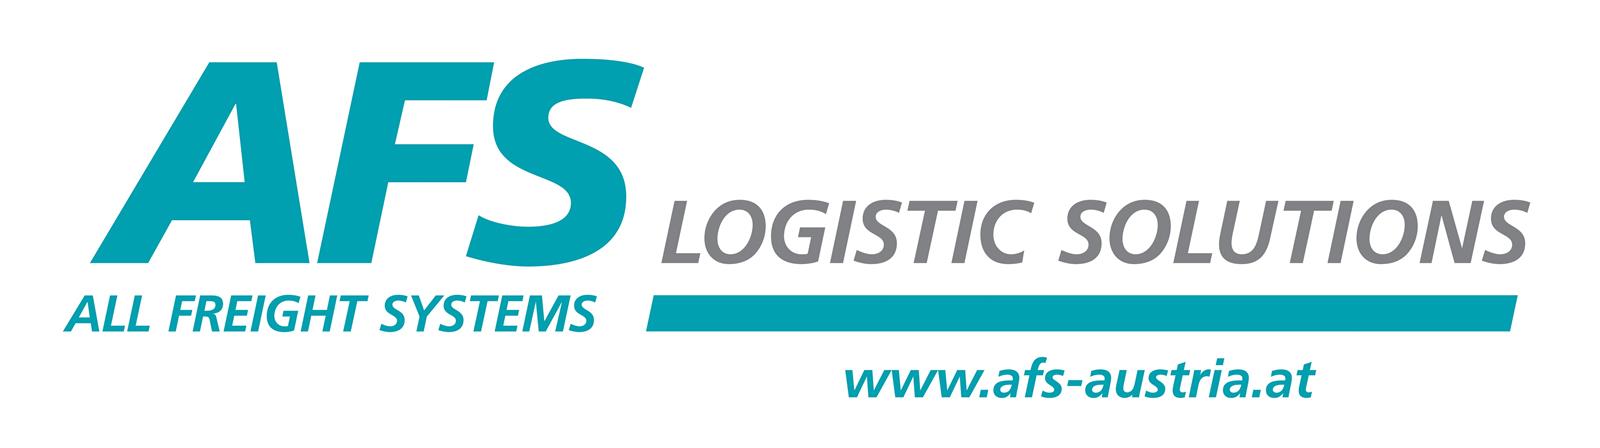 AFS Logistic Solutions